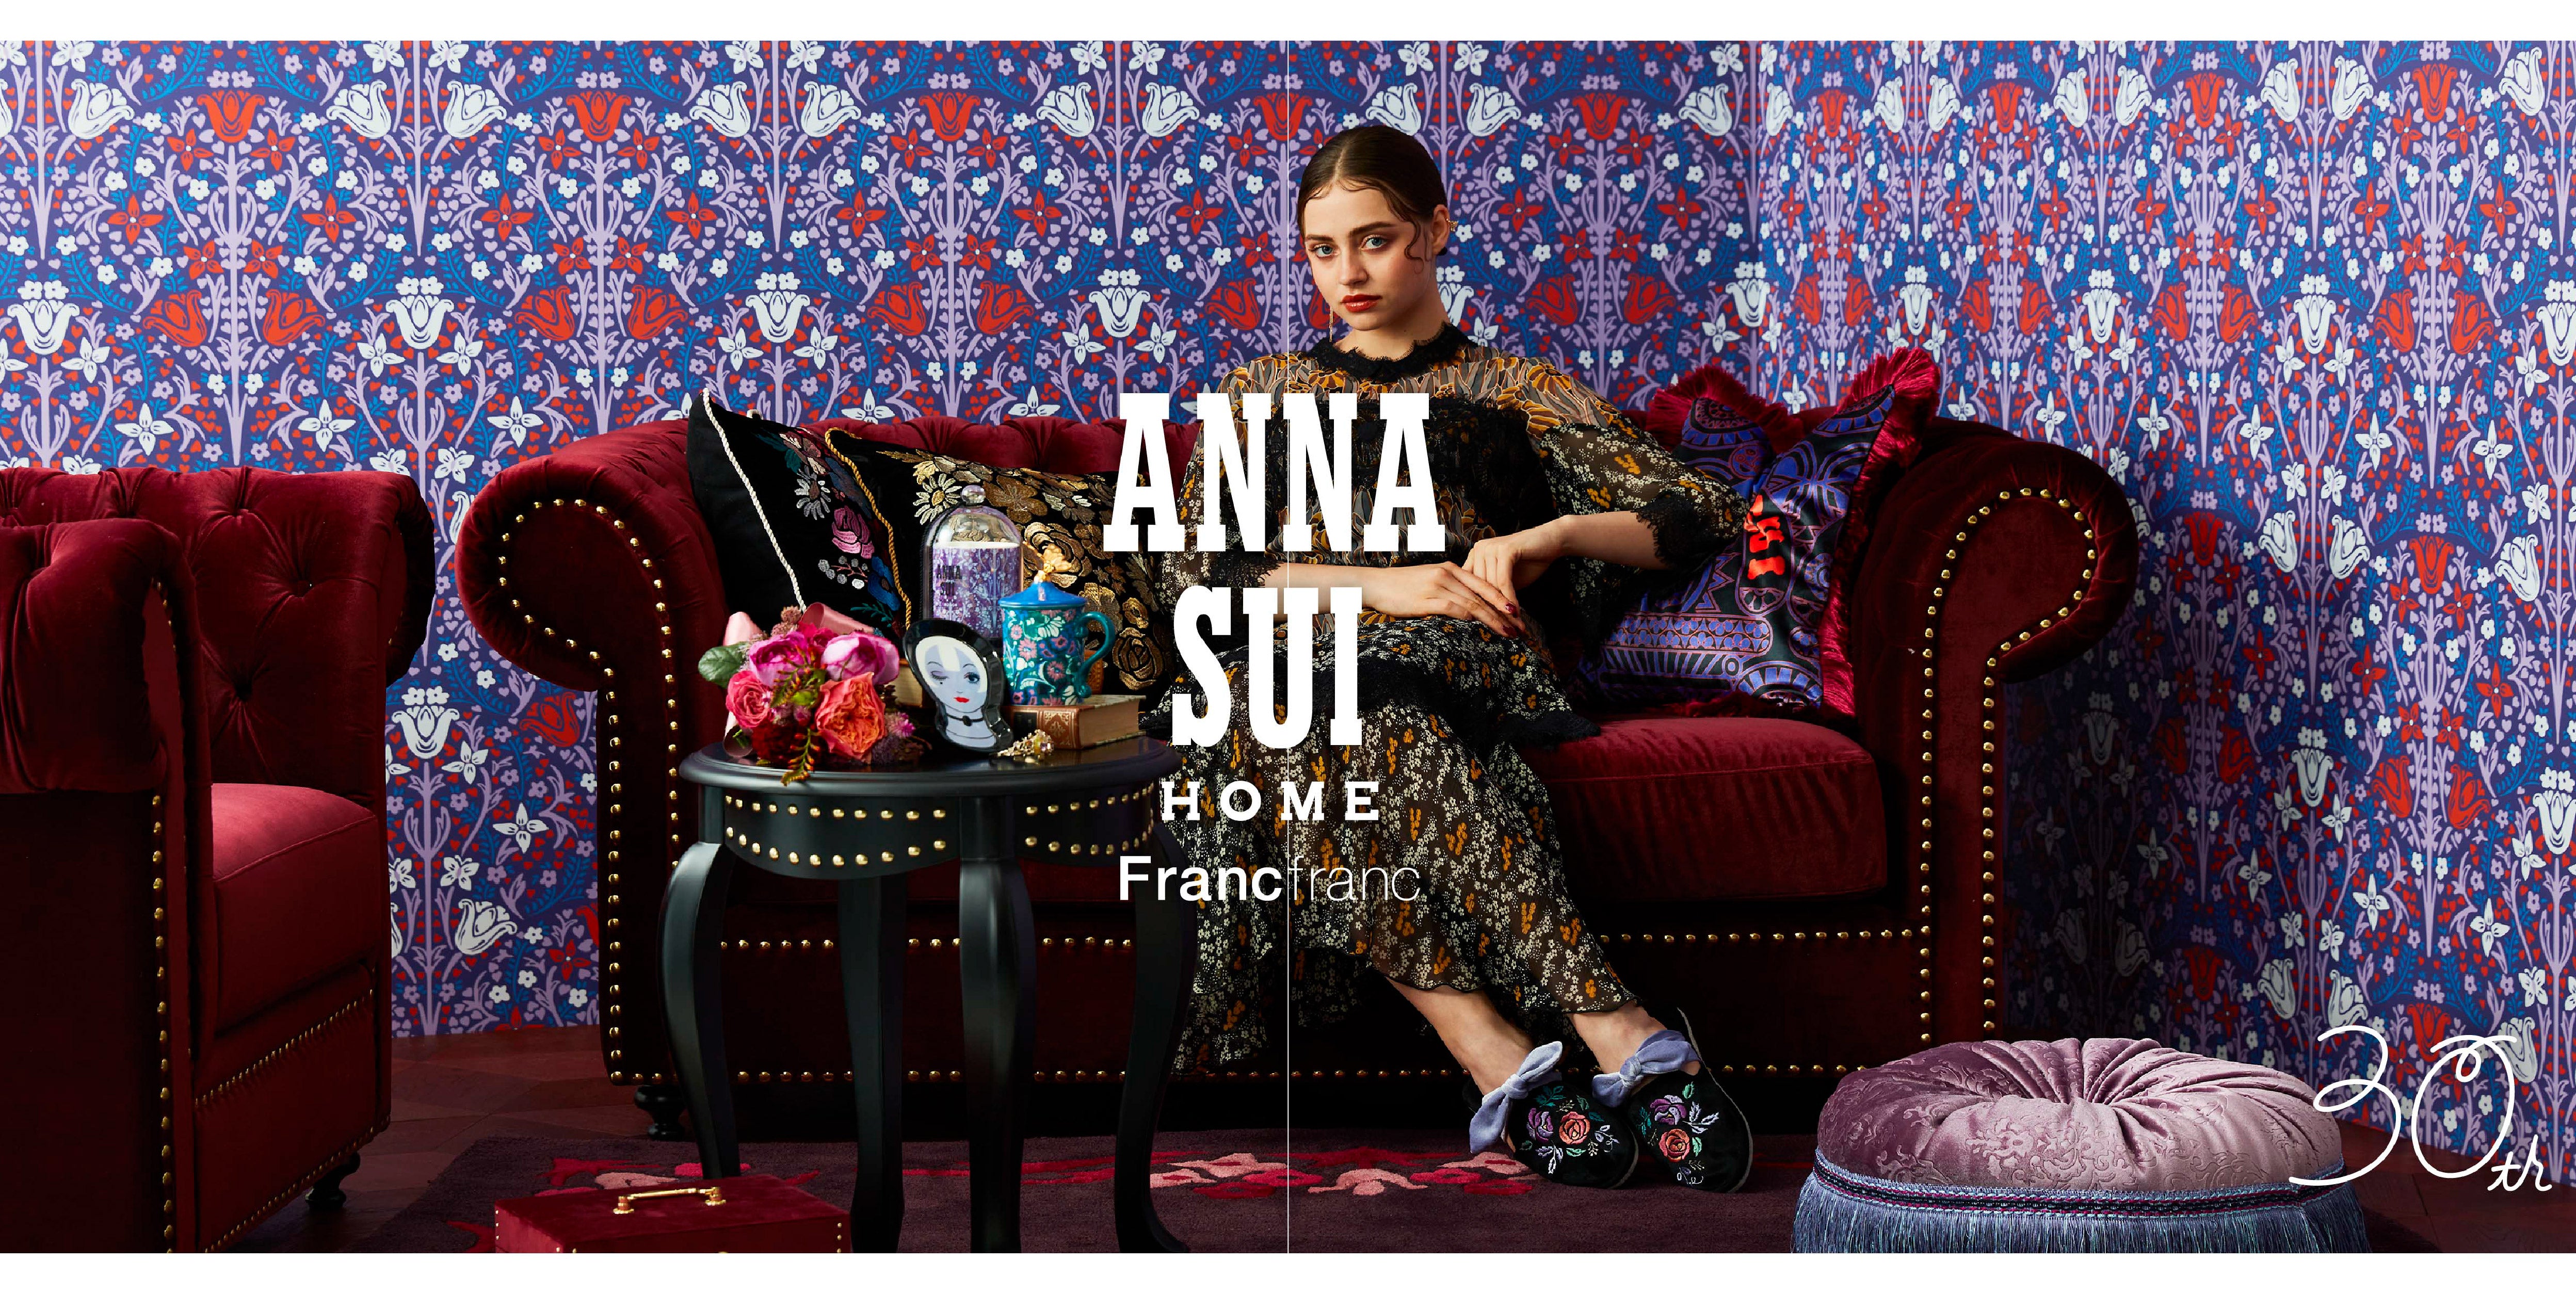 ANNA SUI HOME Francfranc Deployed from Friday, September 3! – アナ 